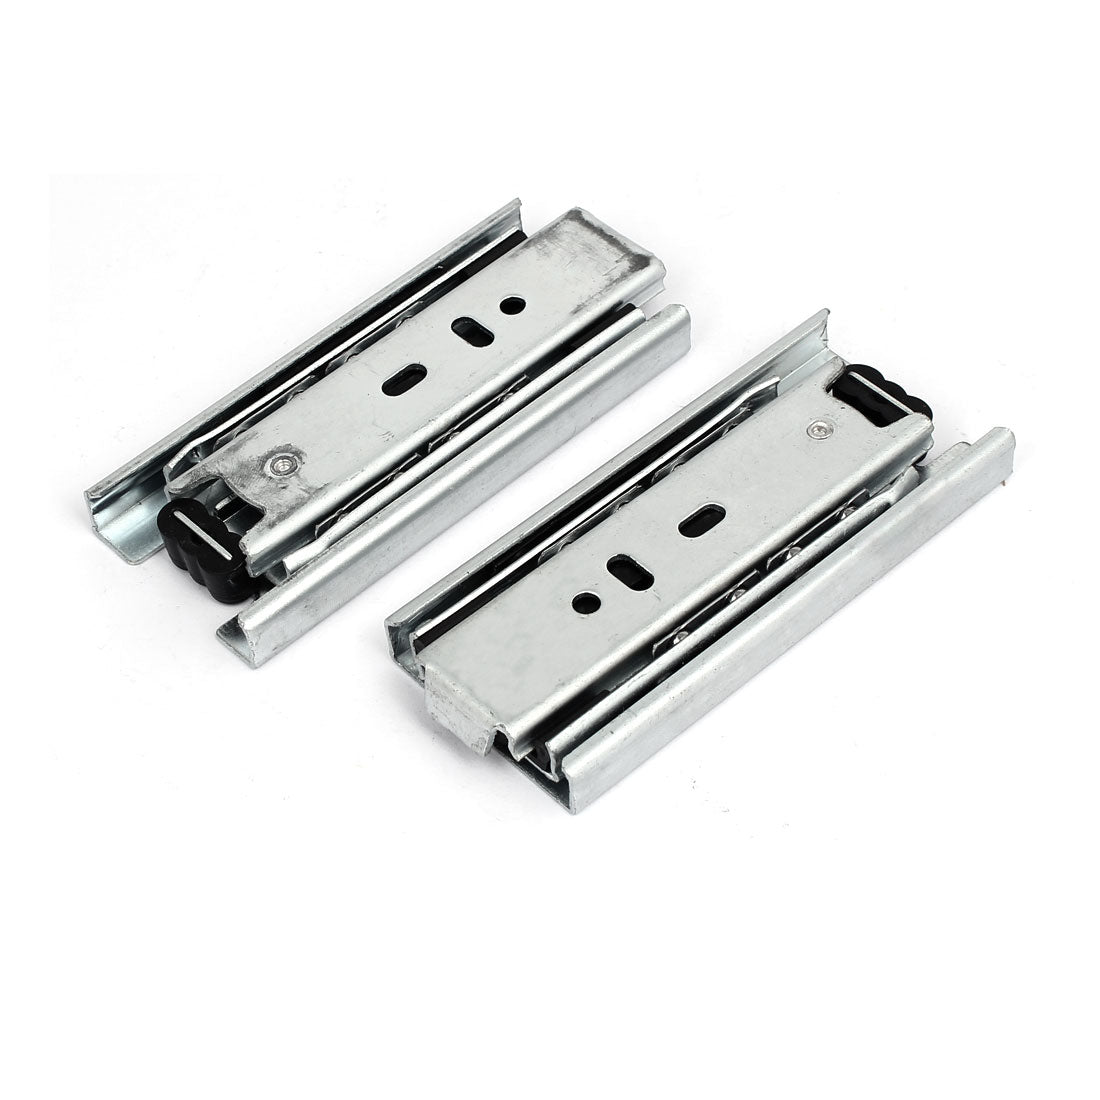 uxcell Uxcell 4-inch 3 Sections Telescoping Ball Bearing Damper Drawer Slide Silver Tone 2pcs